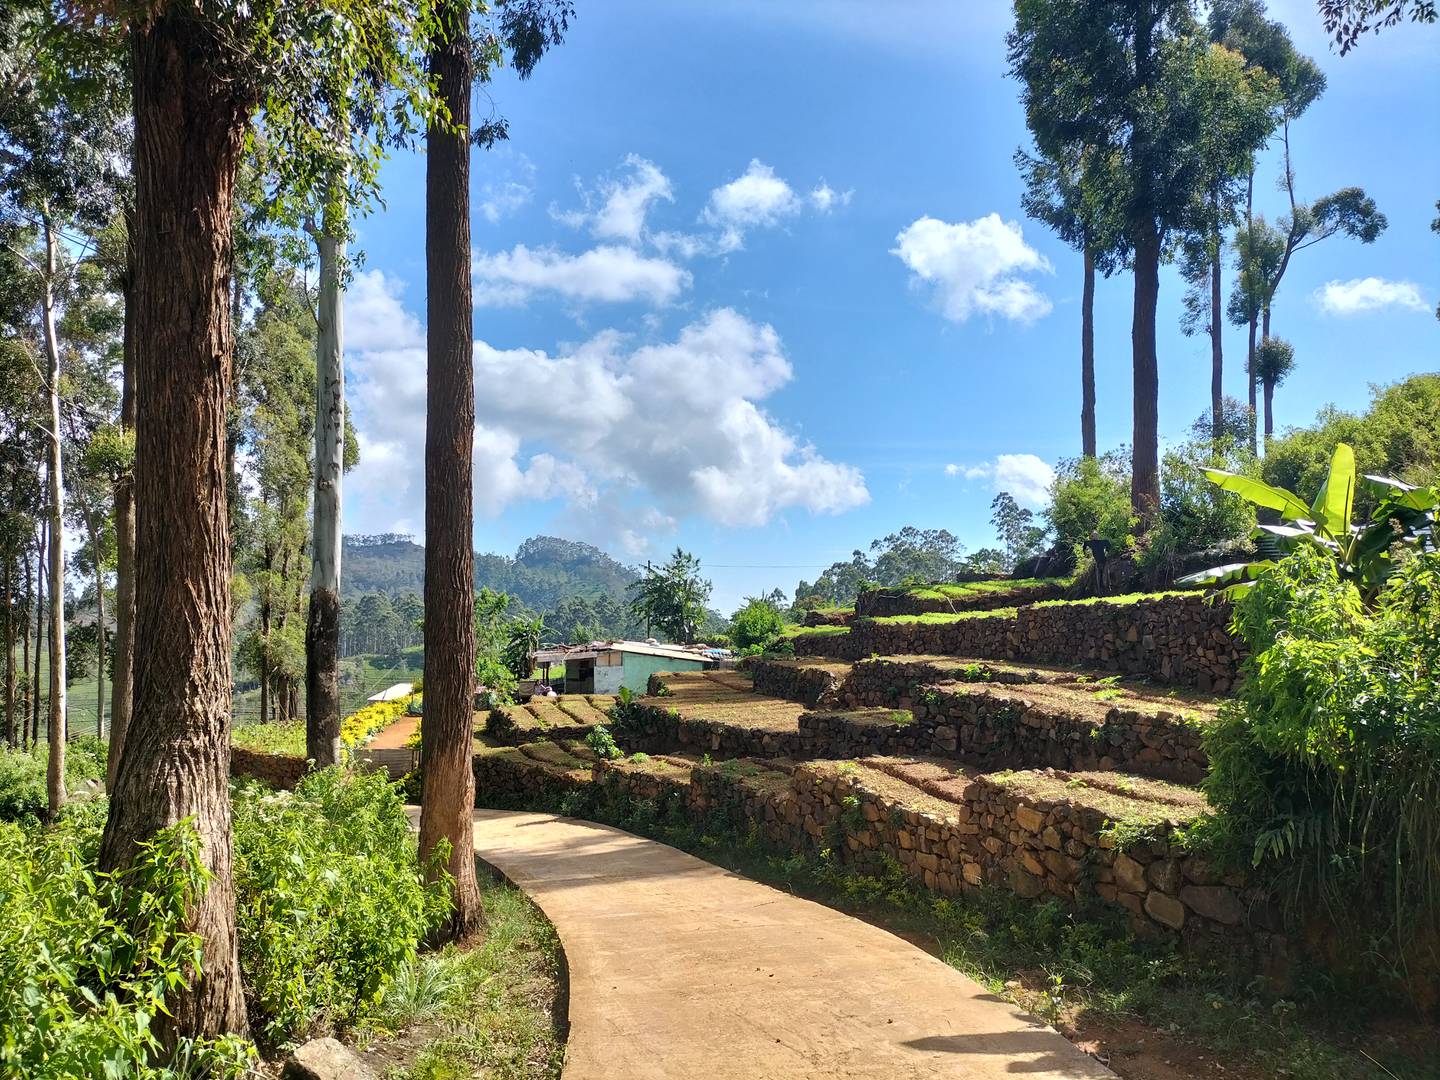 The Pekoe Trail, Sri Lanka's new long-distance walking trail, winds through the central highlands. Photo: Miguel Cunat